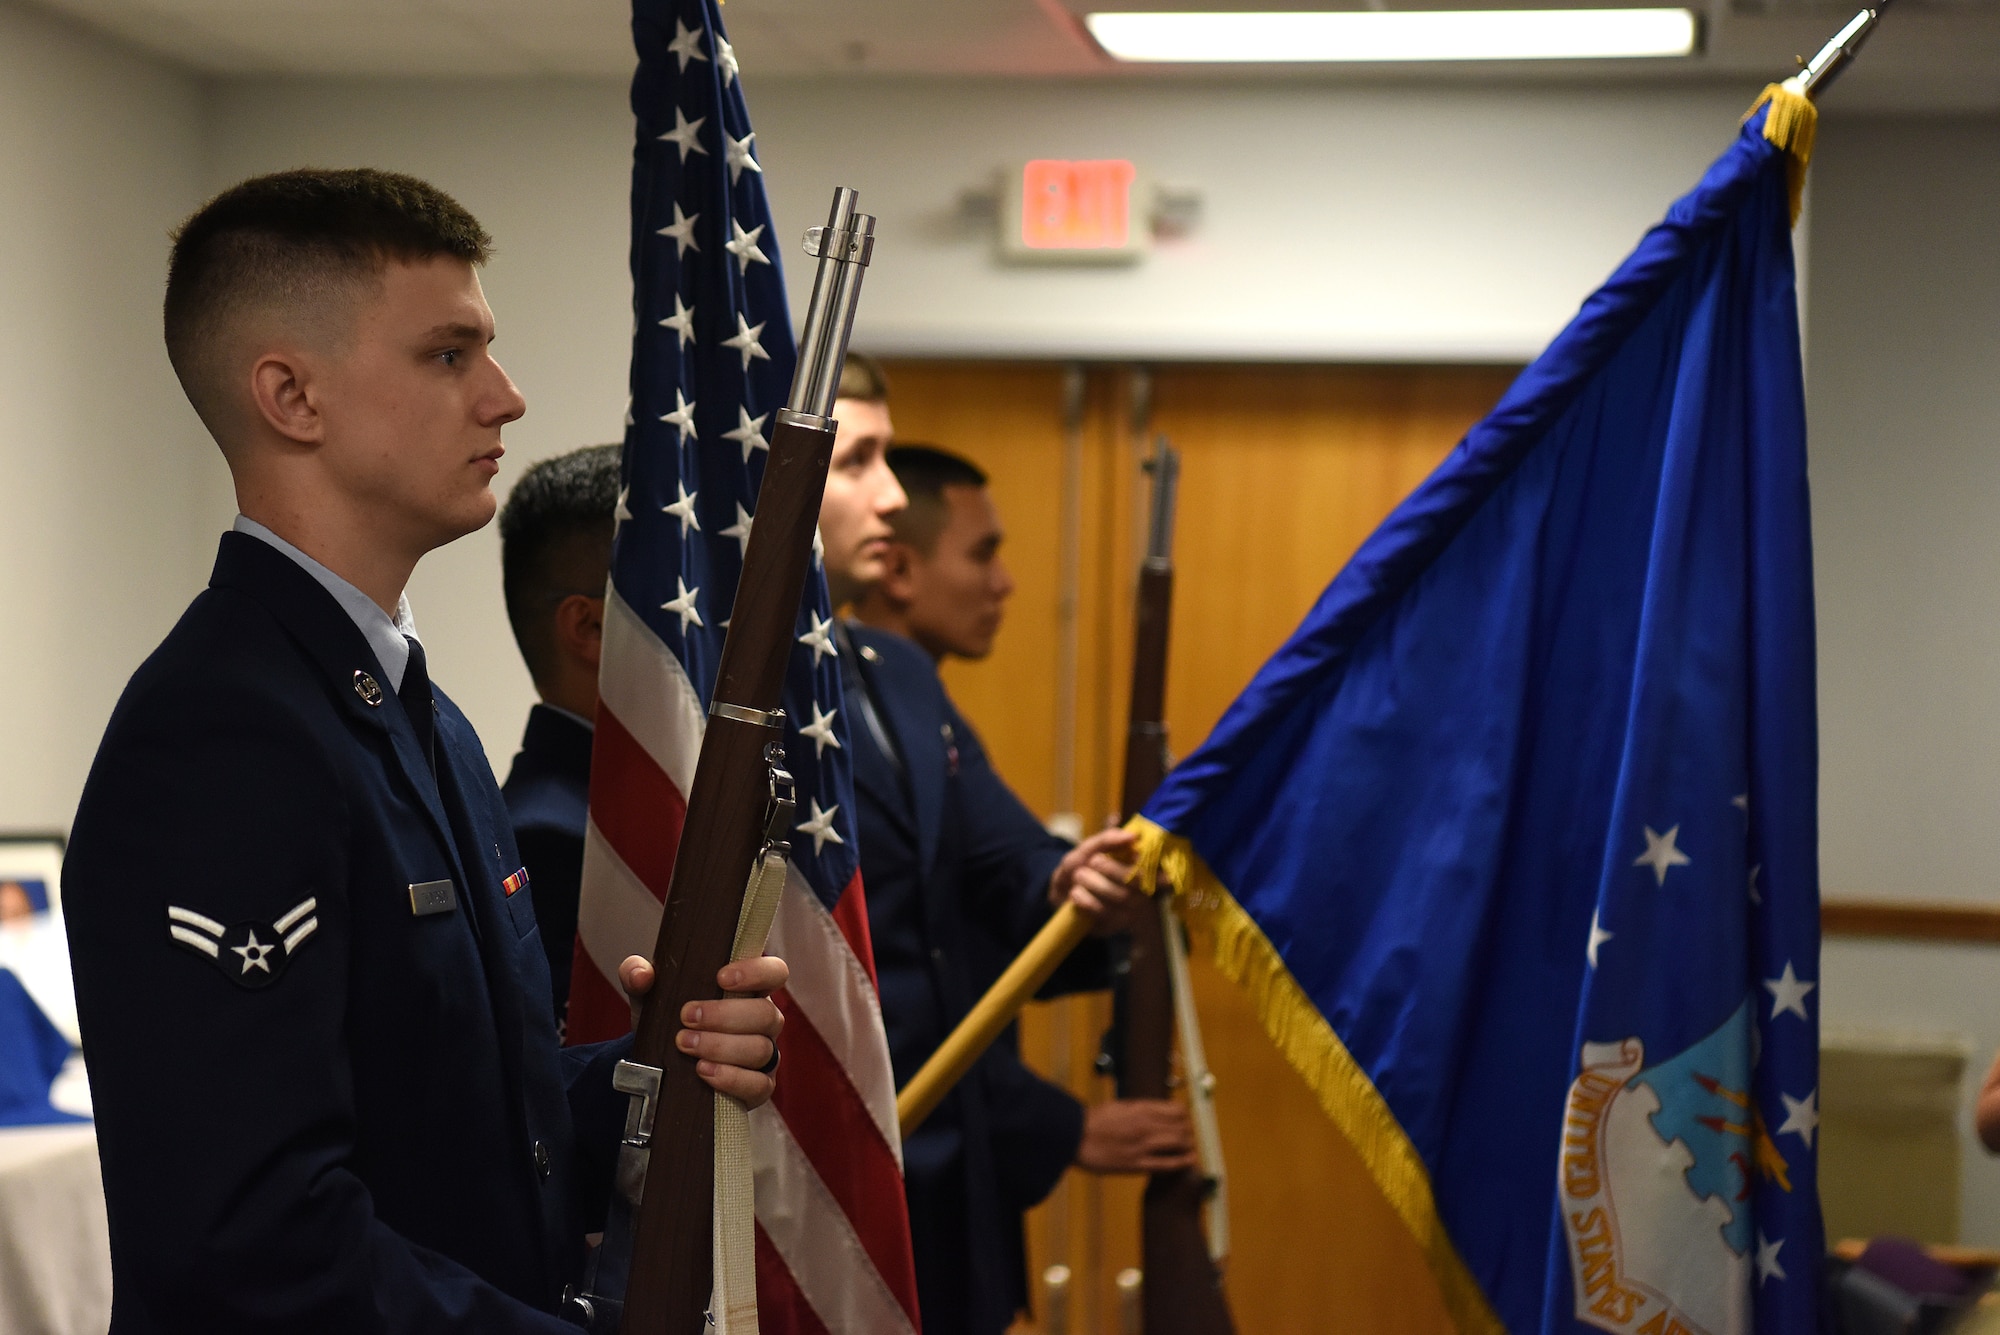 The 81st Contracting Squadron color guard presents the colors during the Sablich Center Auditorium room dedication ceremony for George Budz inside the Sablich Center at Keesler Air Force Base, Mississippi, Oct. 31, 2019. The auditorium has been renamed after Budz who passed away Aug. 3, 2018. Budz served as the 81st CONS commander, the 81st Mission Support Group deputy commander and worked nine years in civil service after he retired as a lieutenant colonel. (U.S. Air Force photo by Senior Airman Suzie Plotnikov)